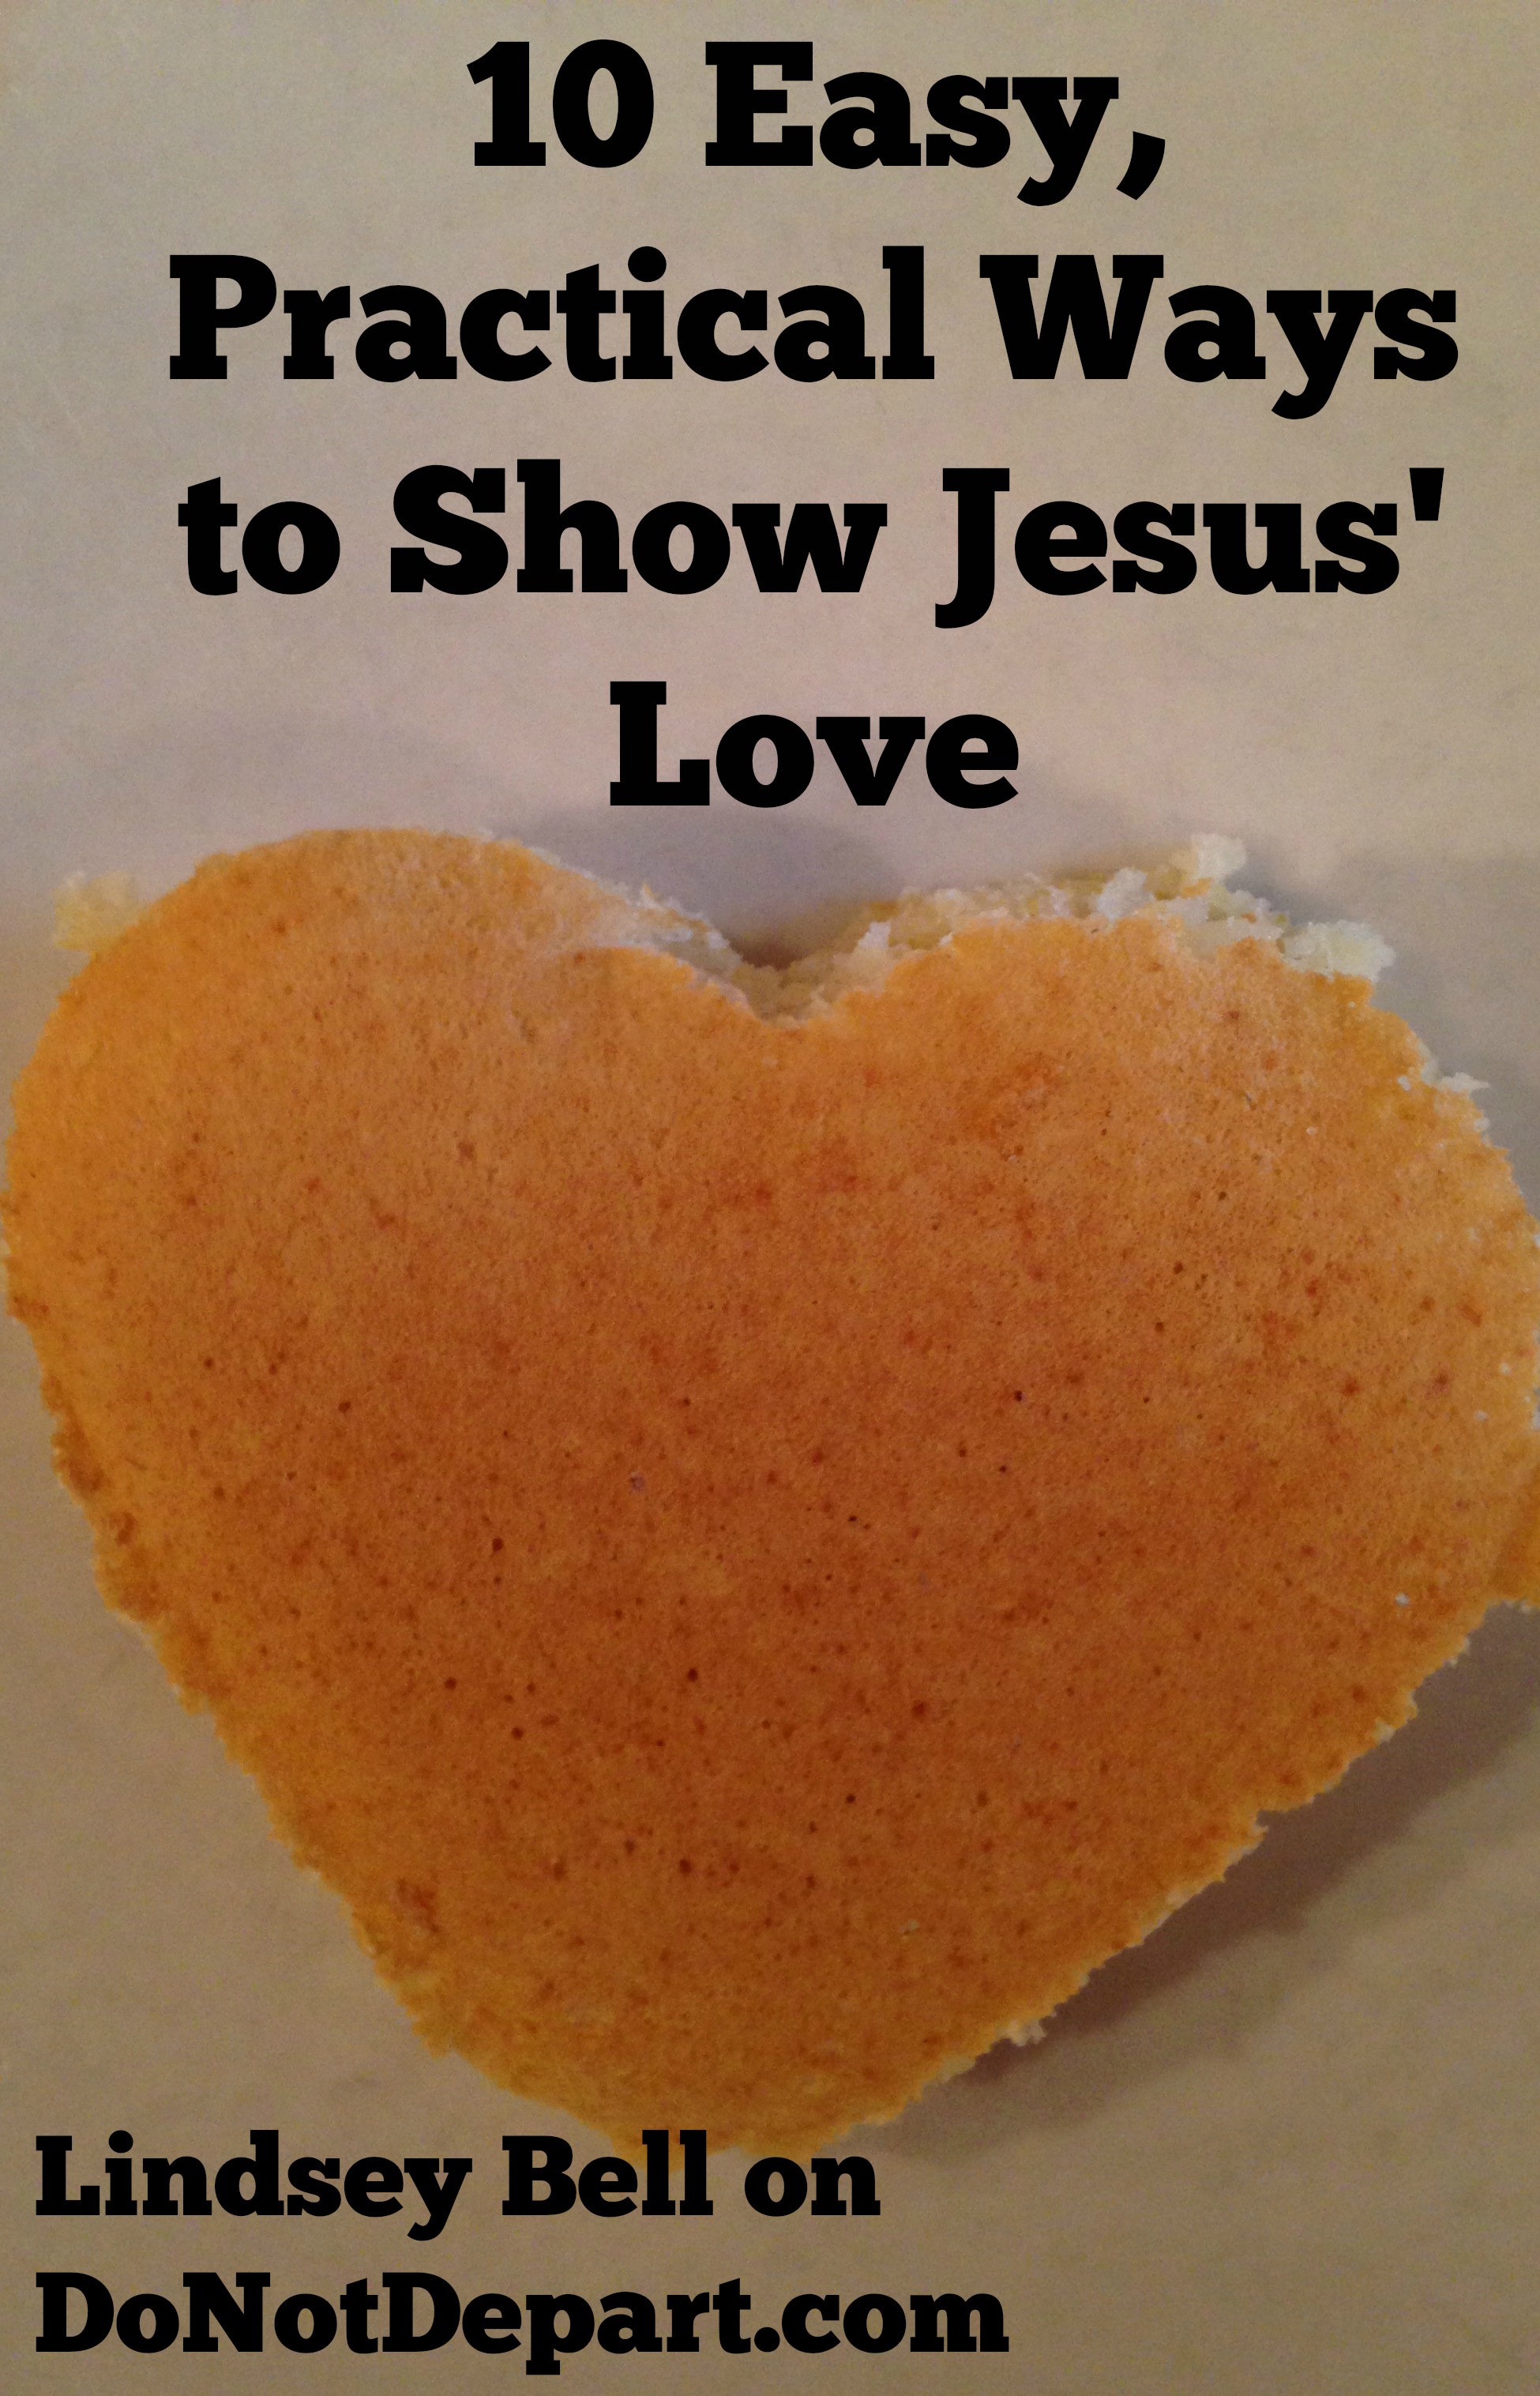 10 easy ways to show Jesus' love to your friends and family